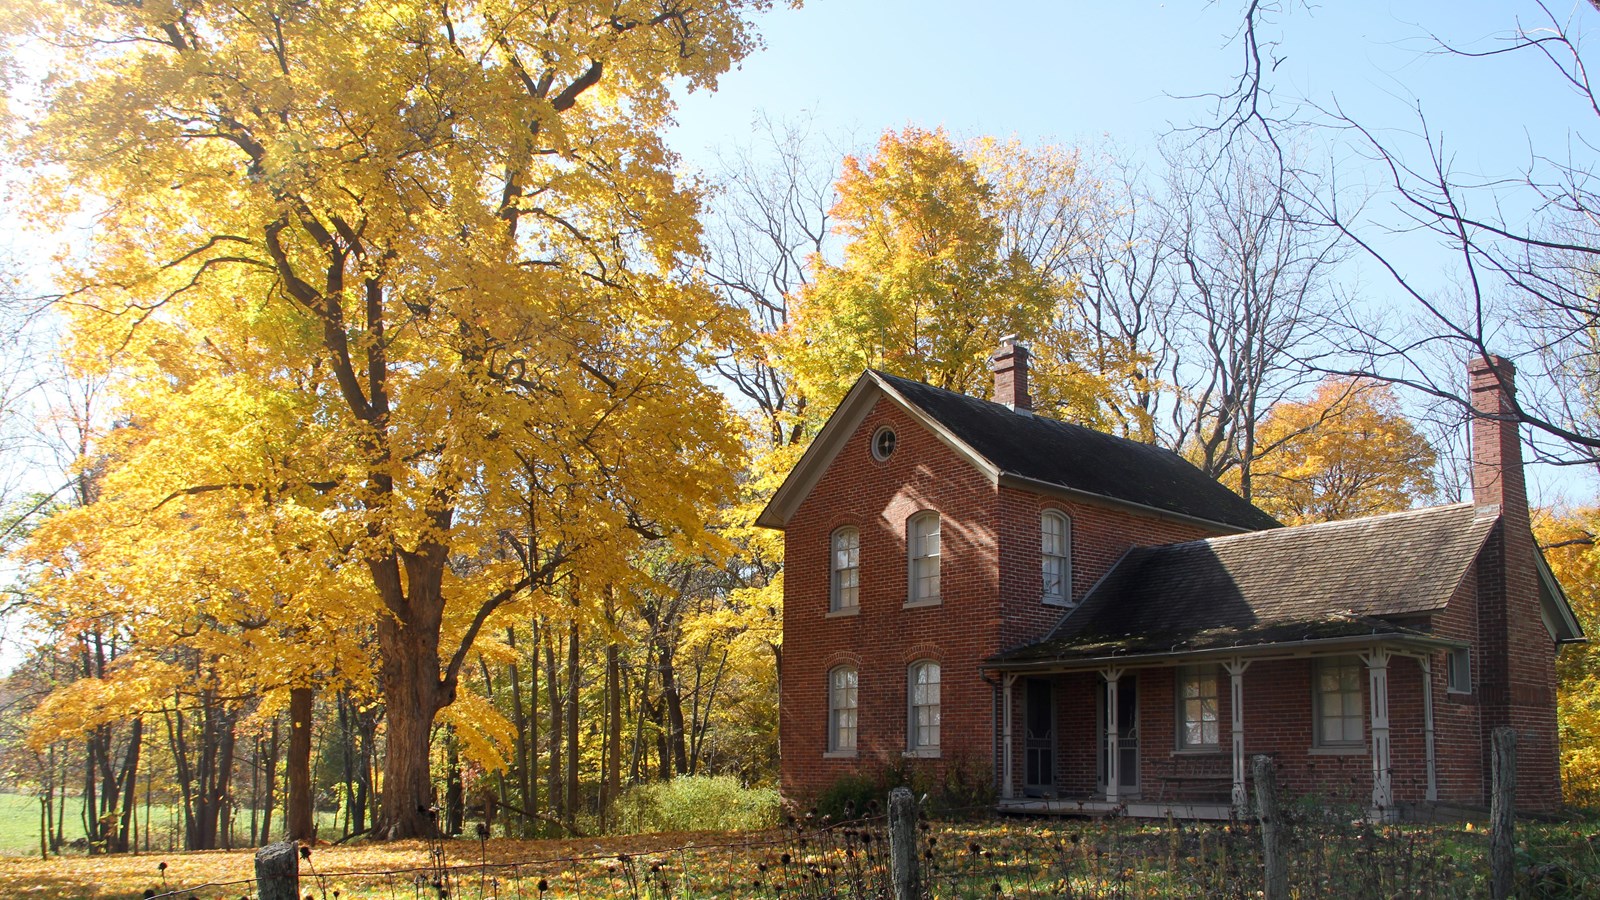 Leaves of yellow and gold surround the red brick farmhouse.